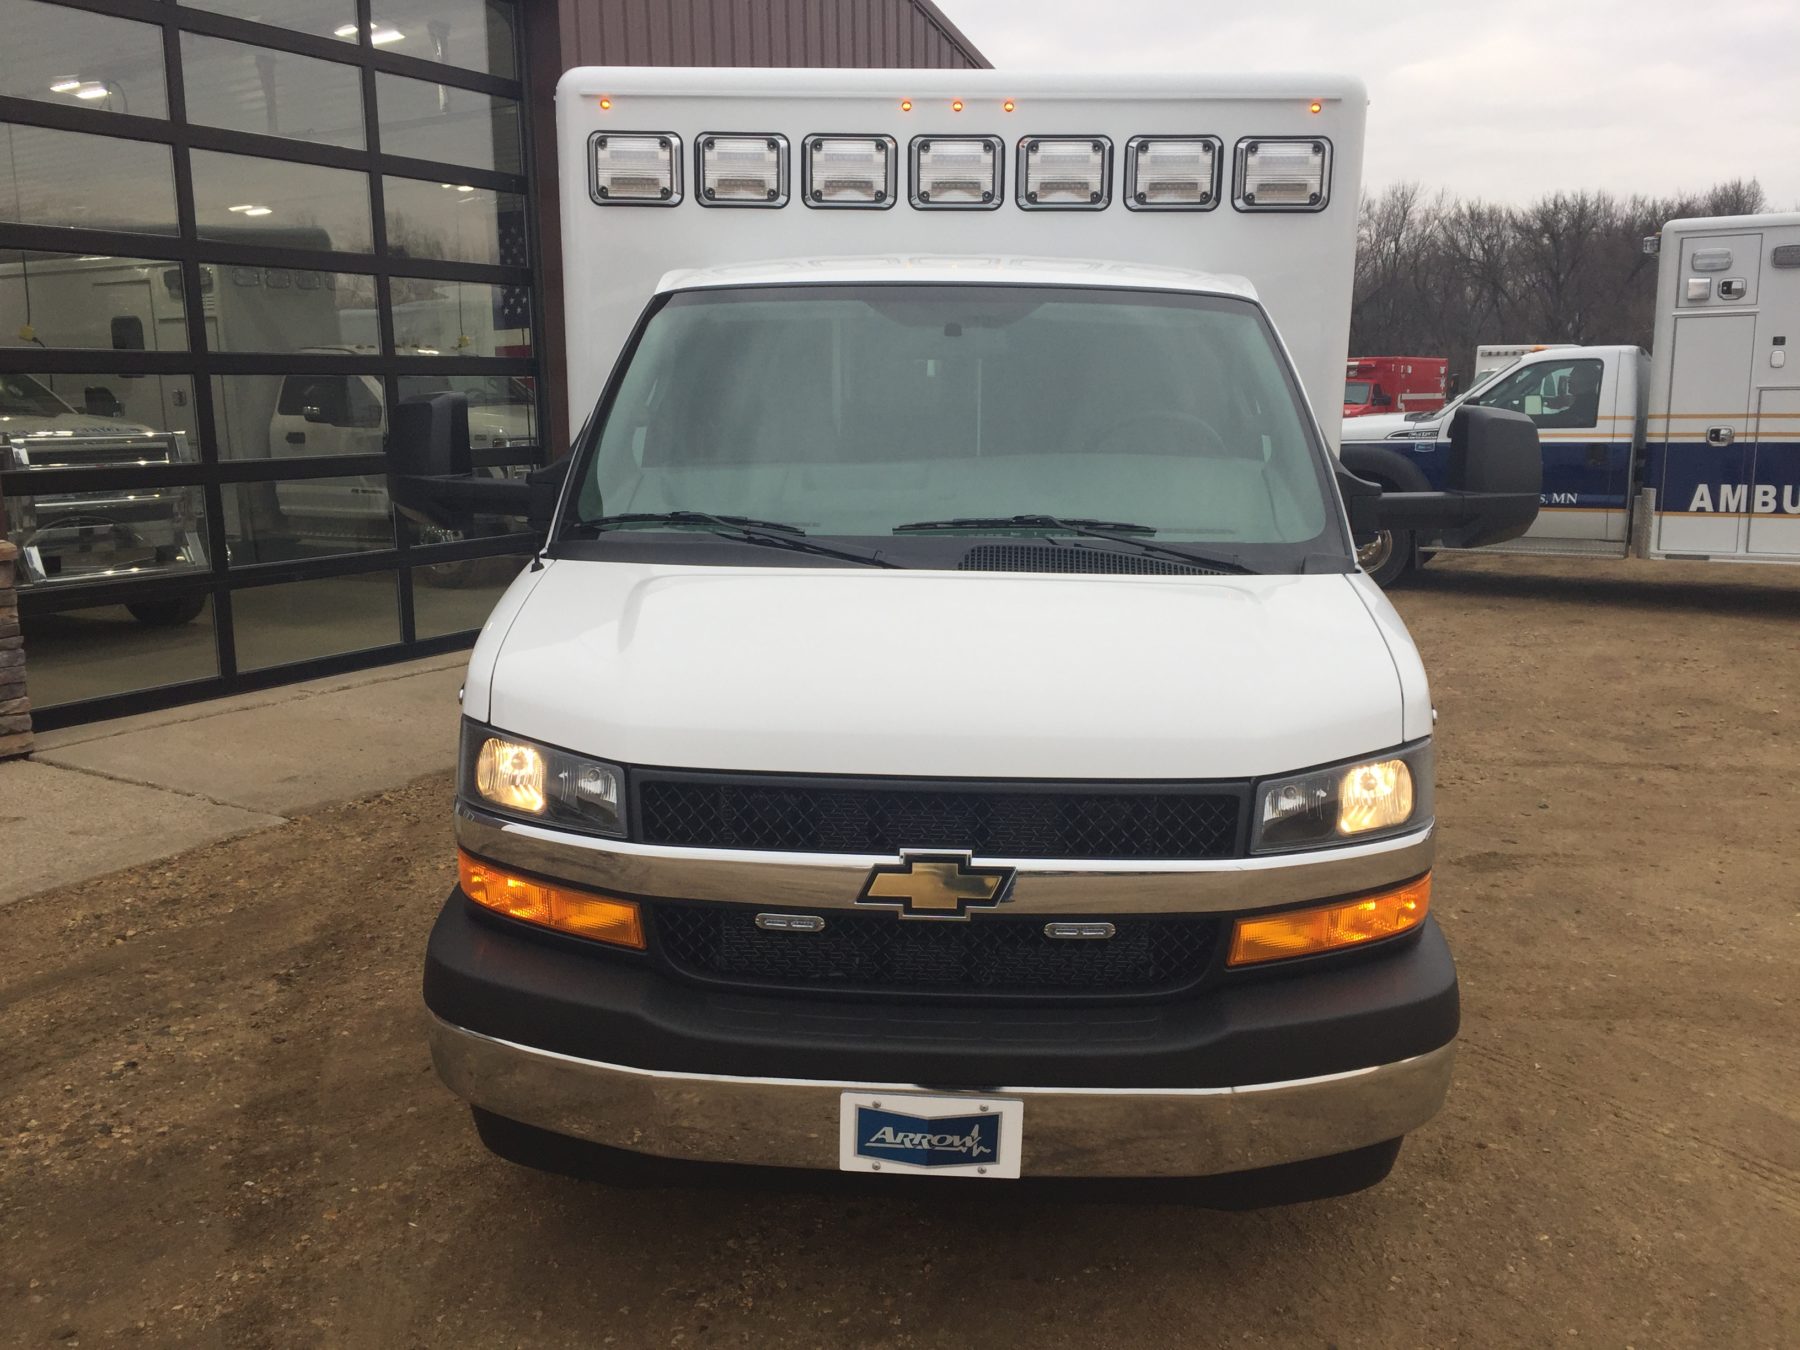 2019 Chevrolet G4500 Type 3 Ambulance For Sale – Picture 7